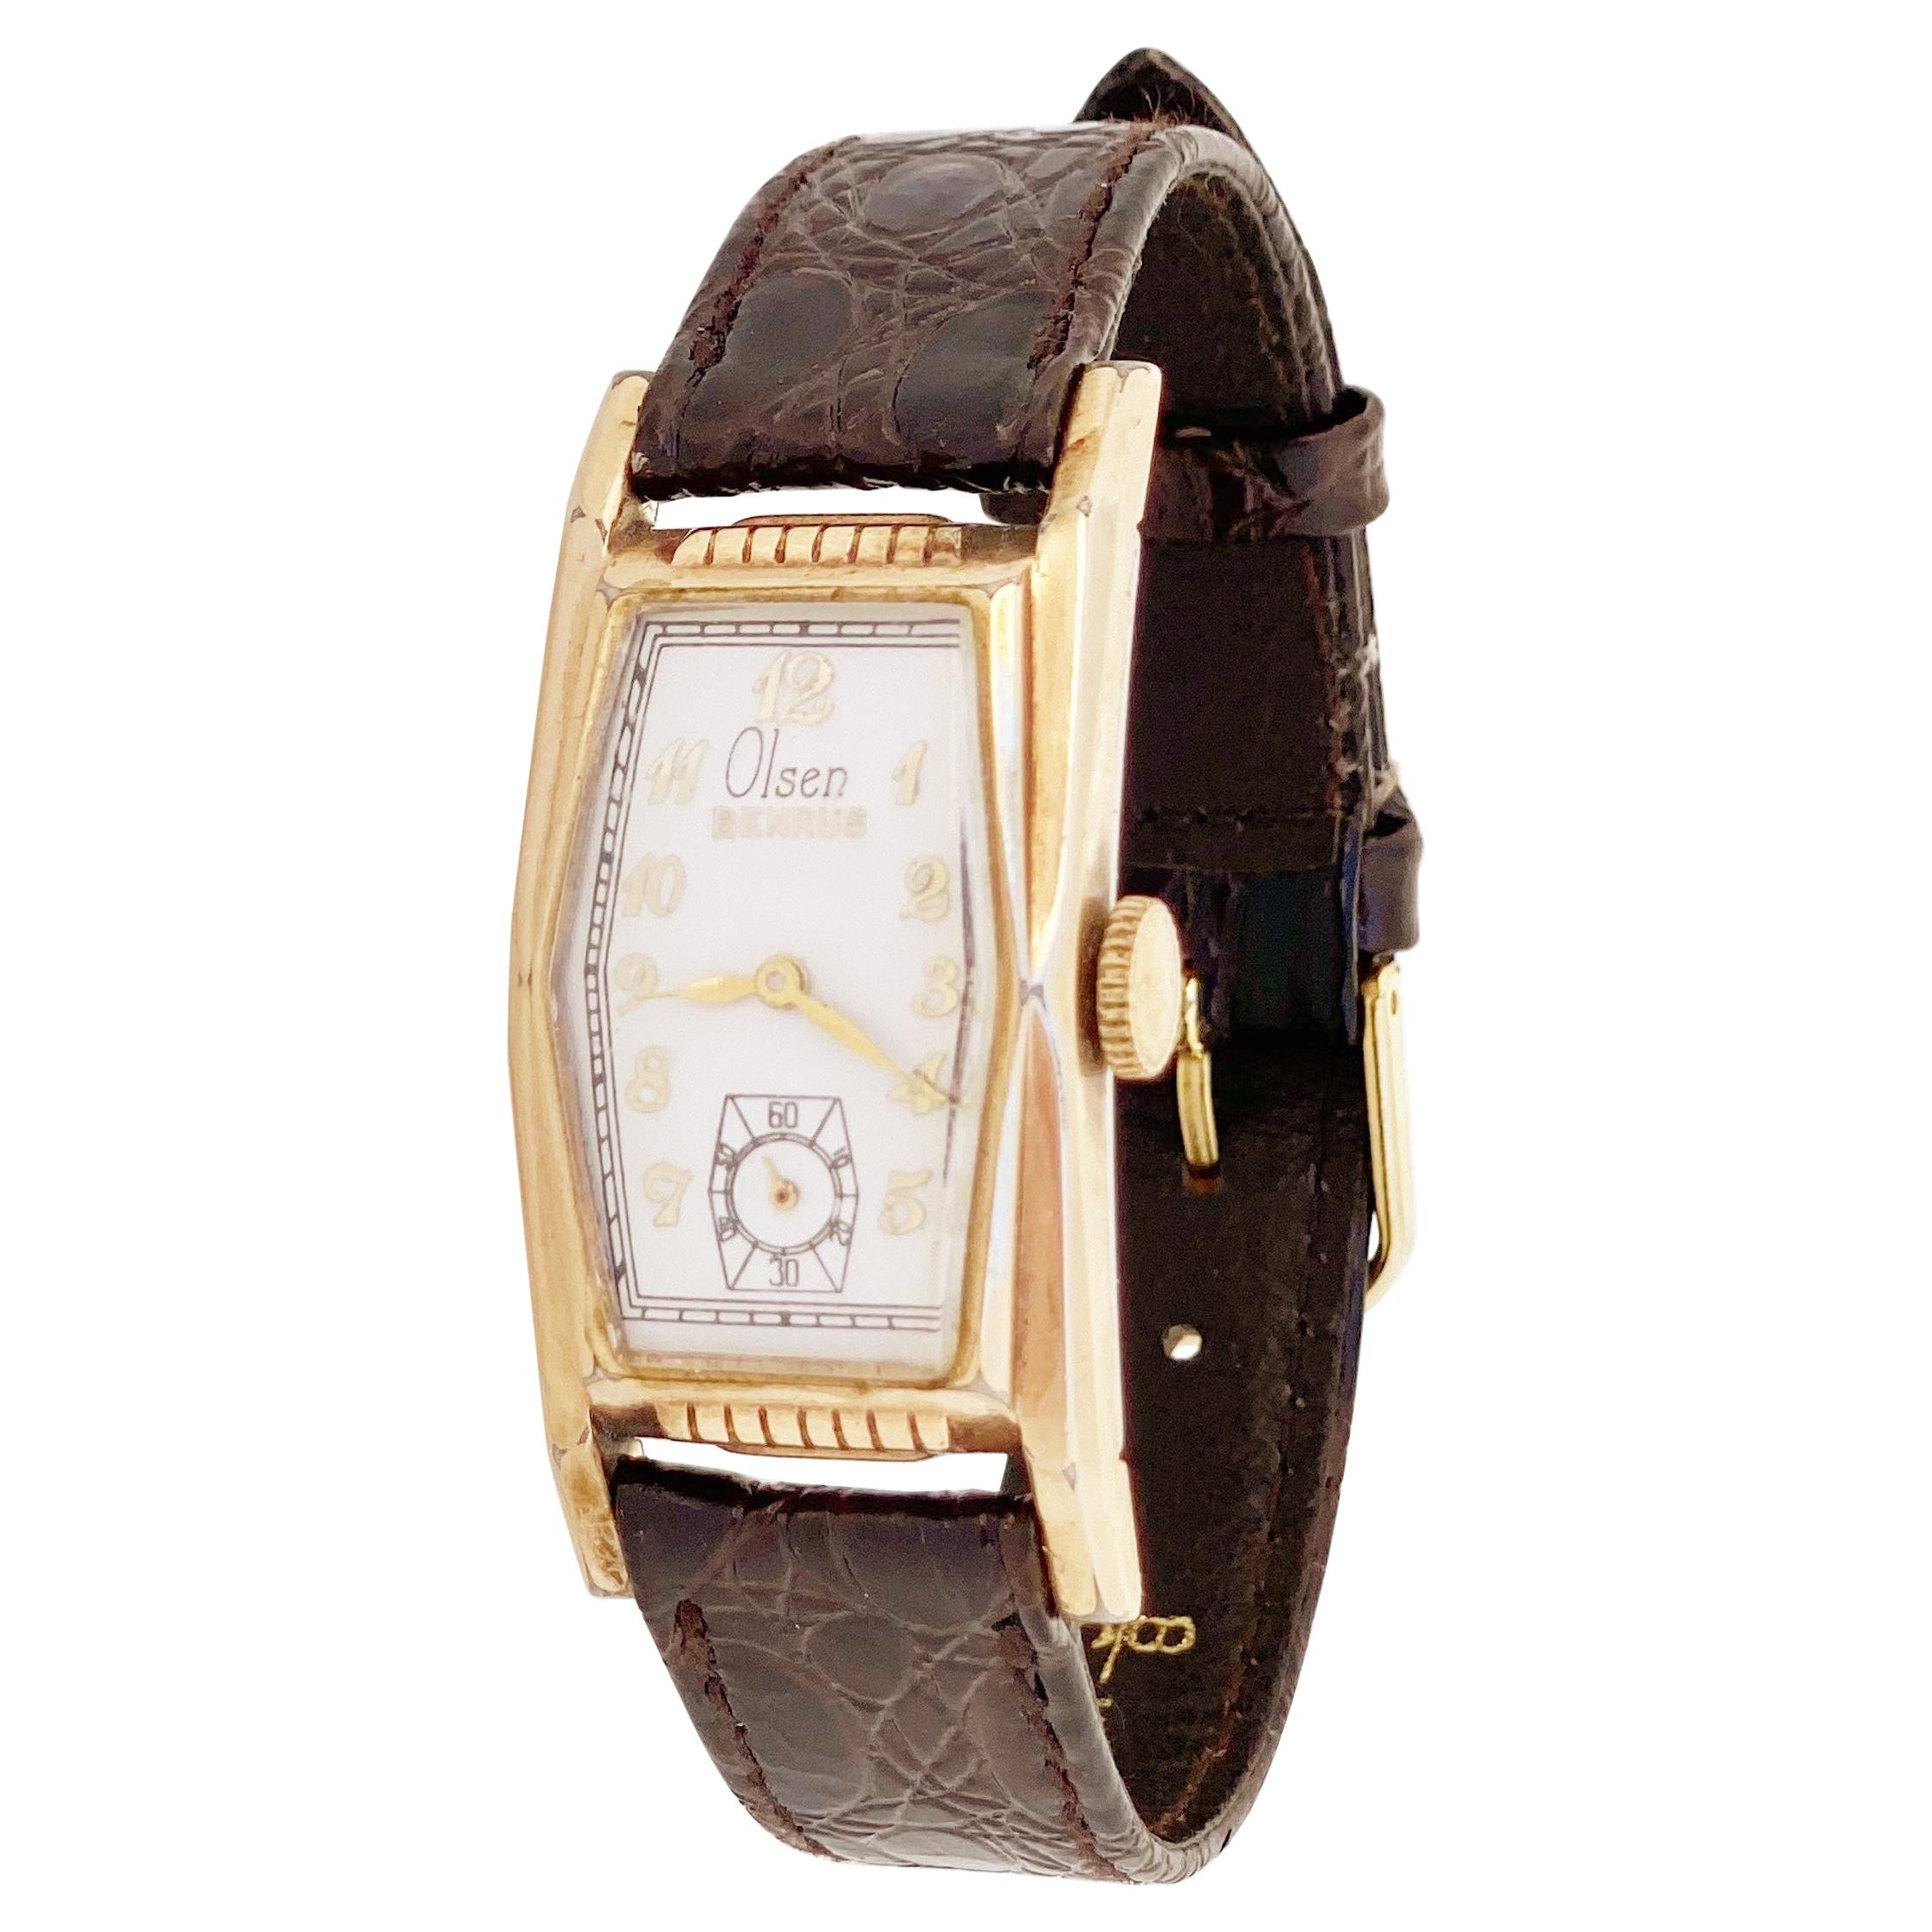 Rectangular Art Deco Style "Olsen" Watch with Leather Strap by Benrus, 1930s For Sale